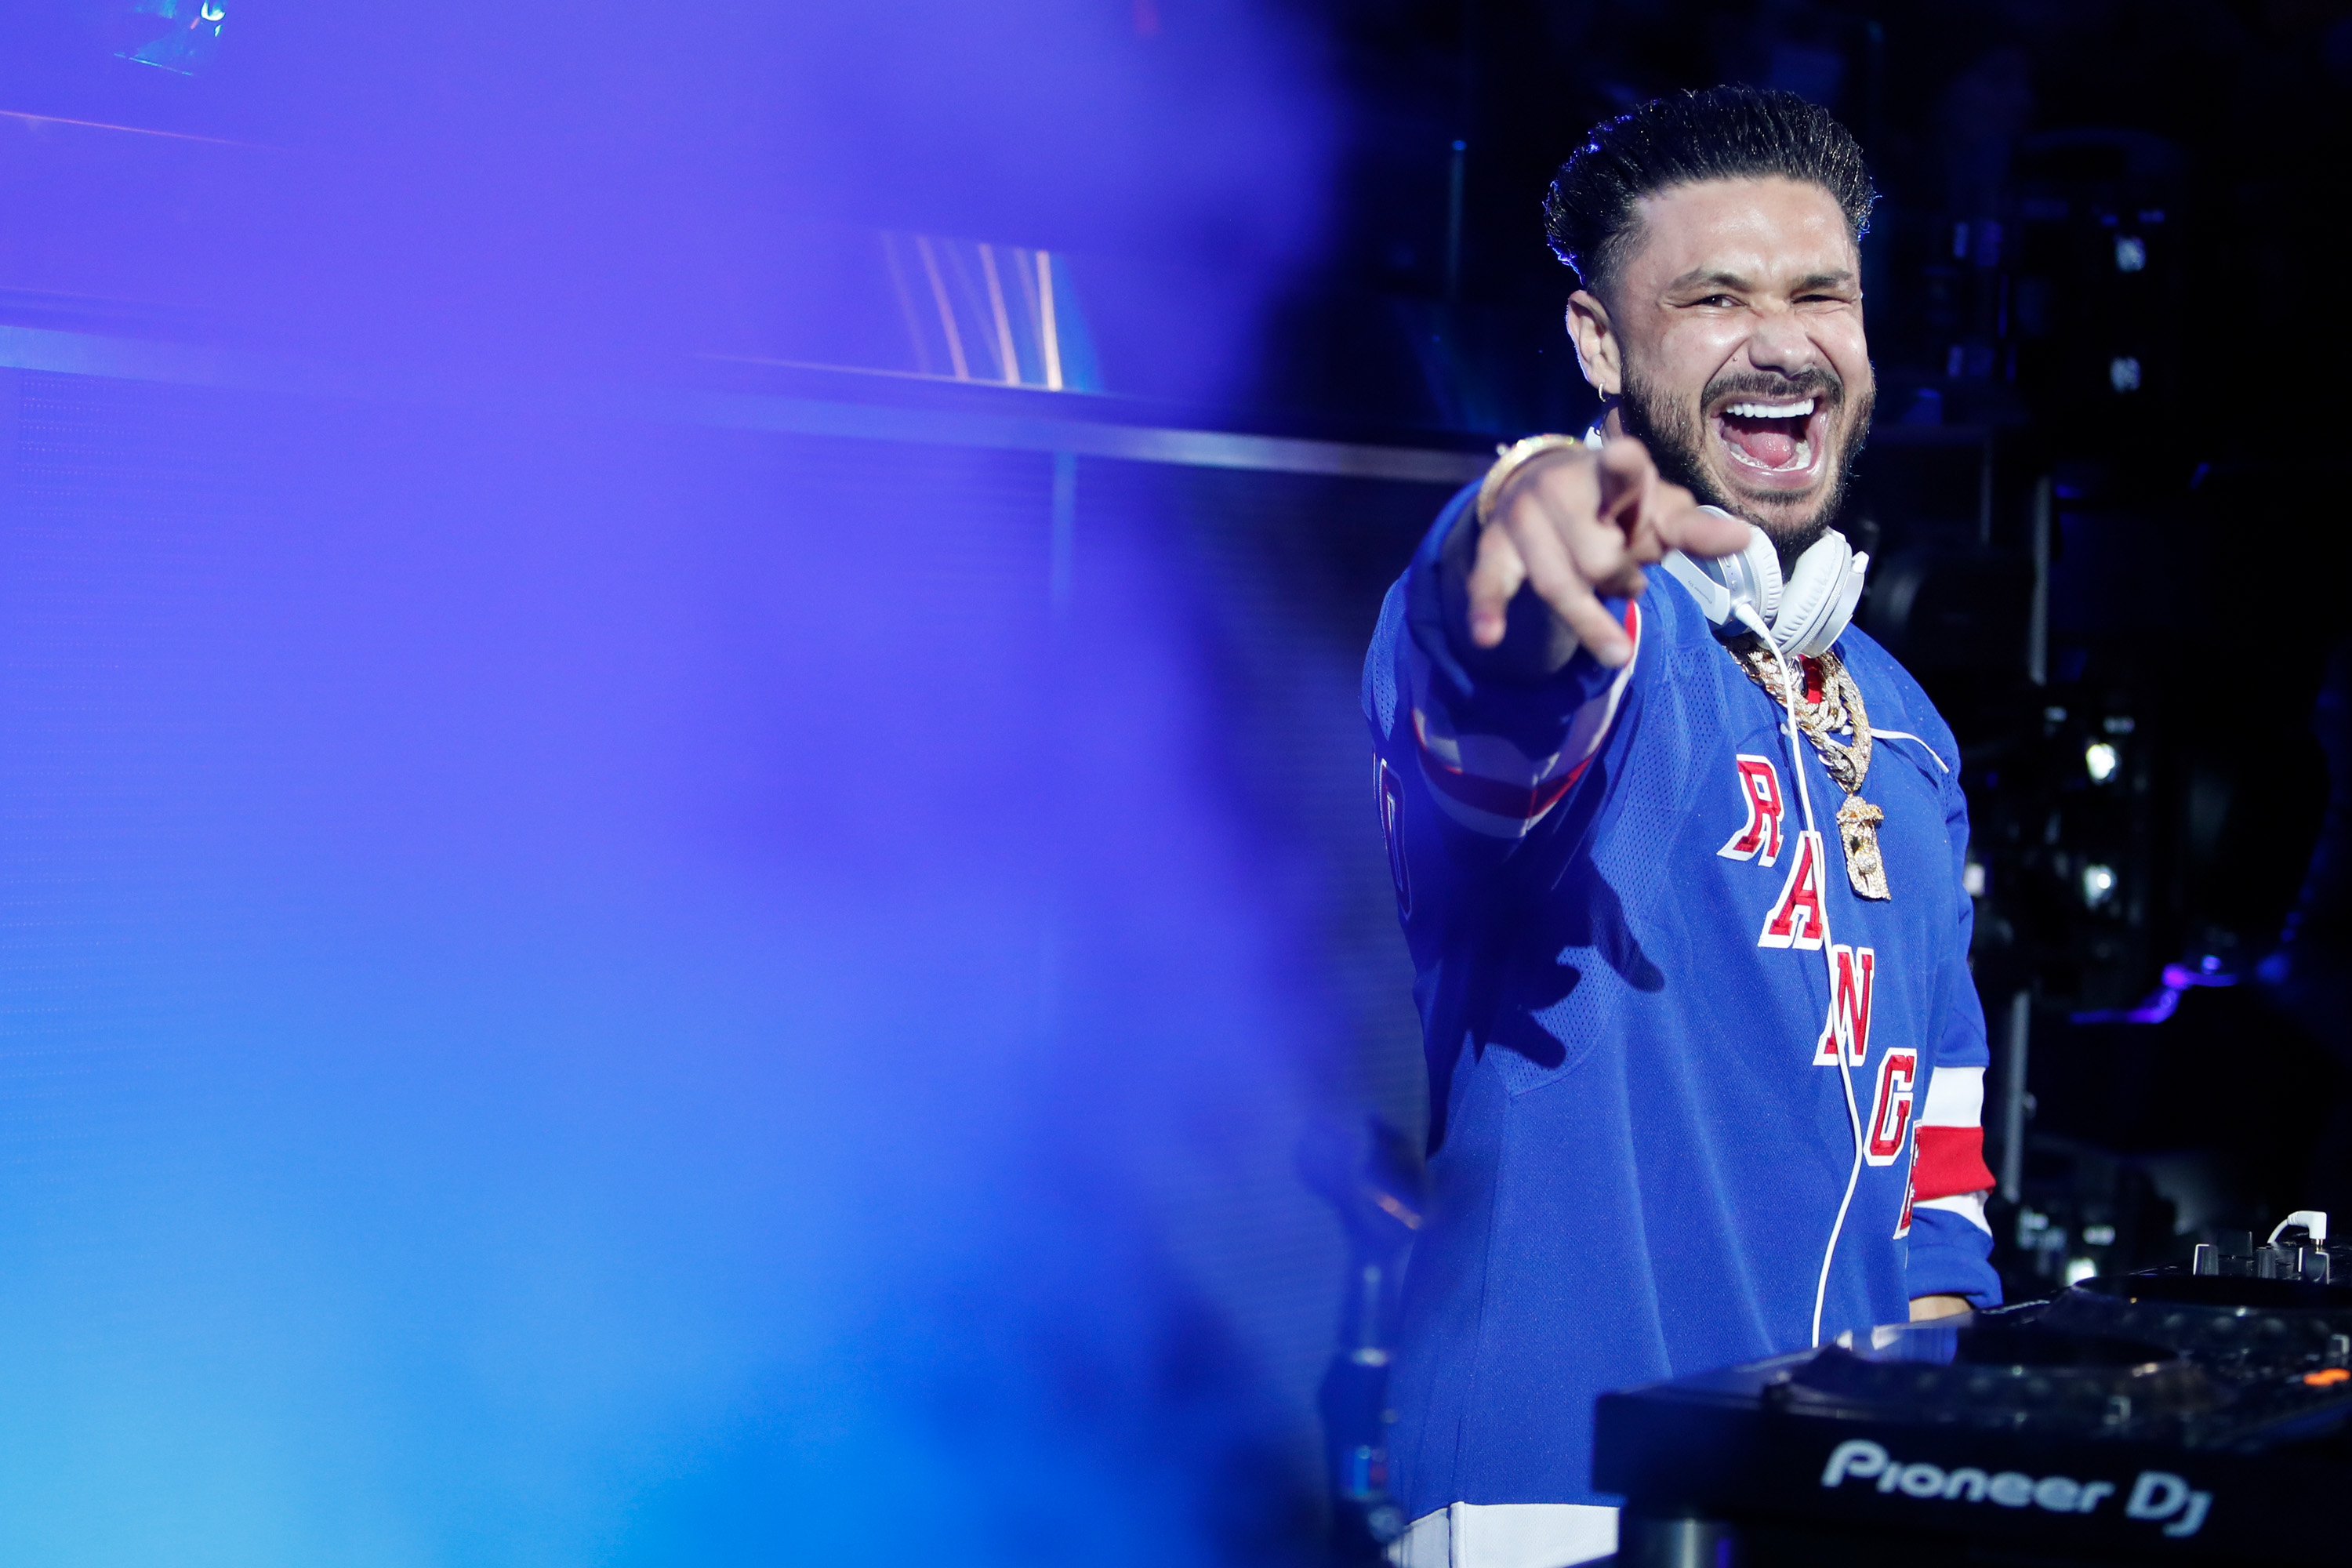 'Jersey Shore: Family Vacation' star Pauly DelVecchio DJing at the New York Rangers game in 2022